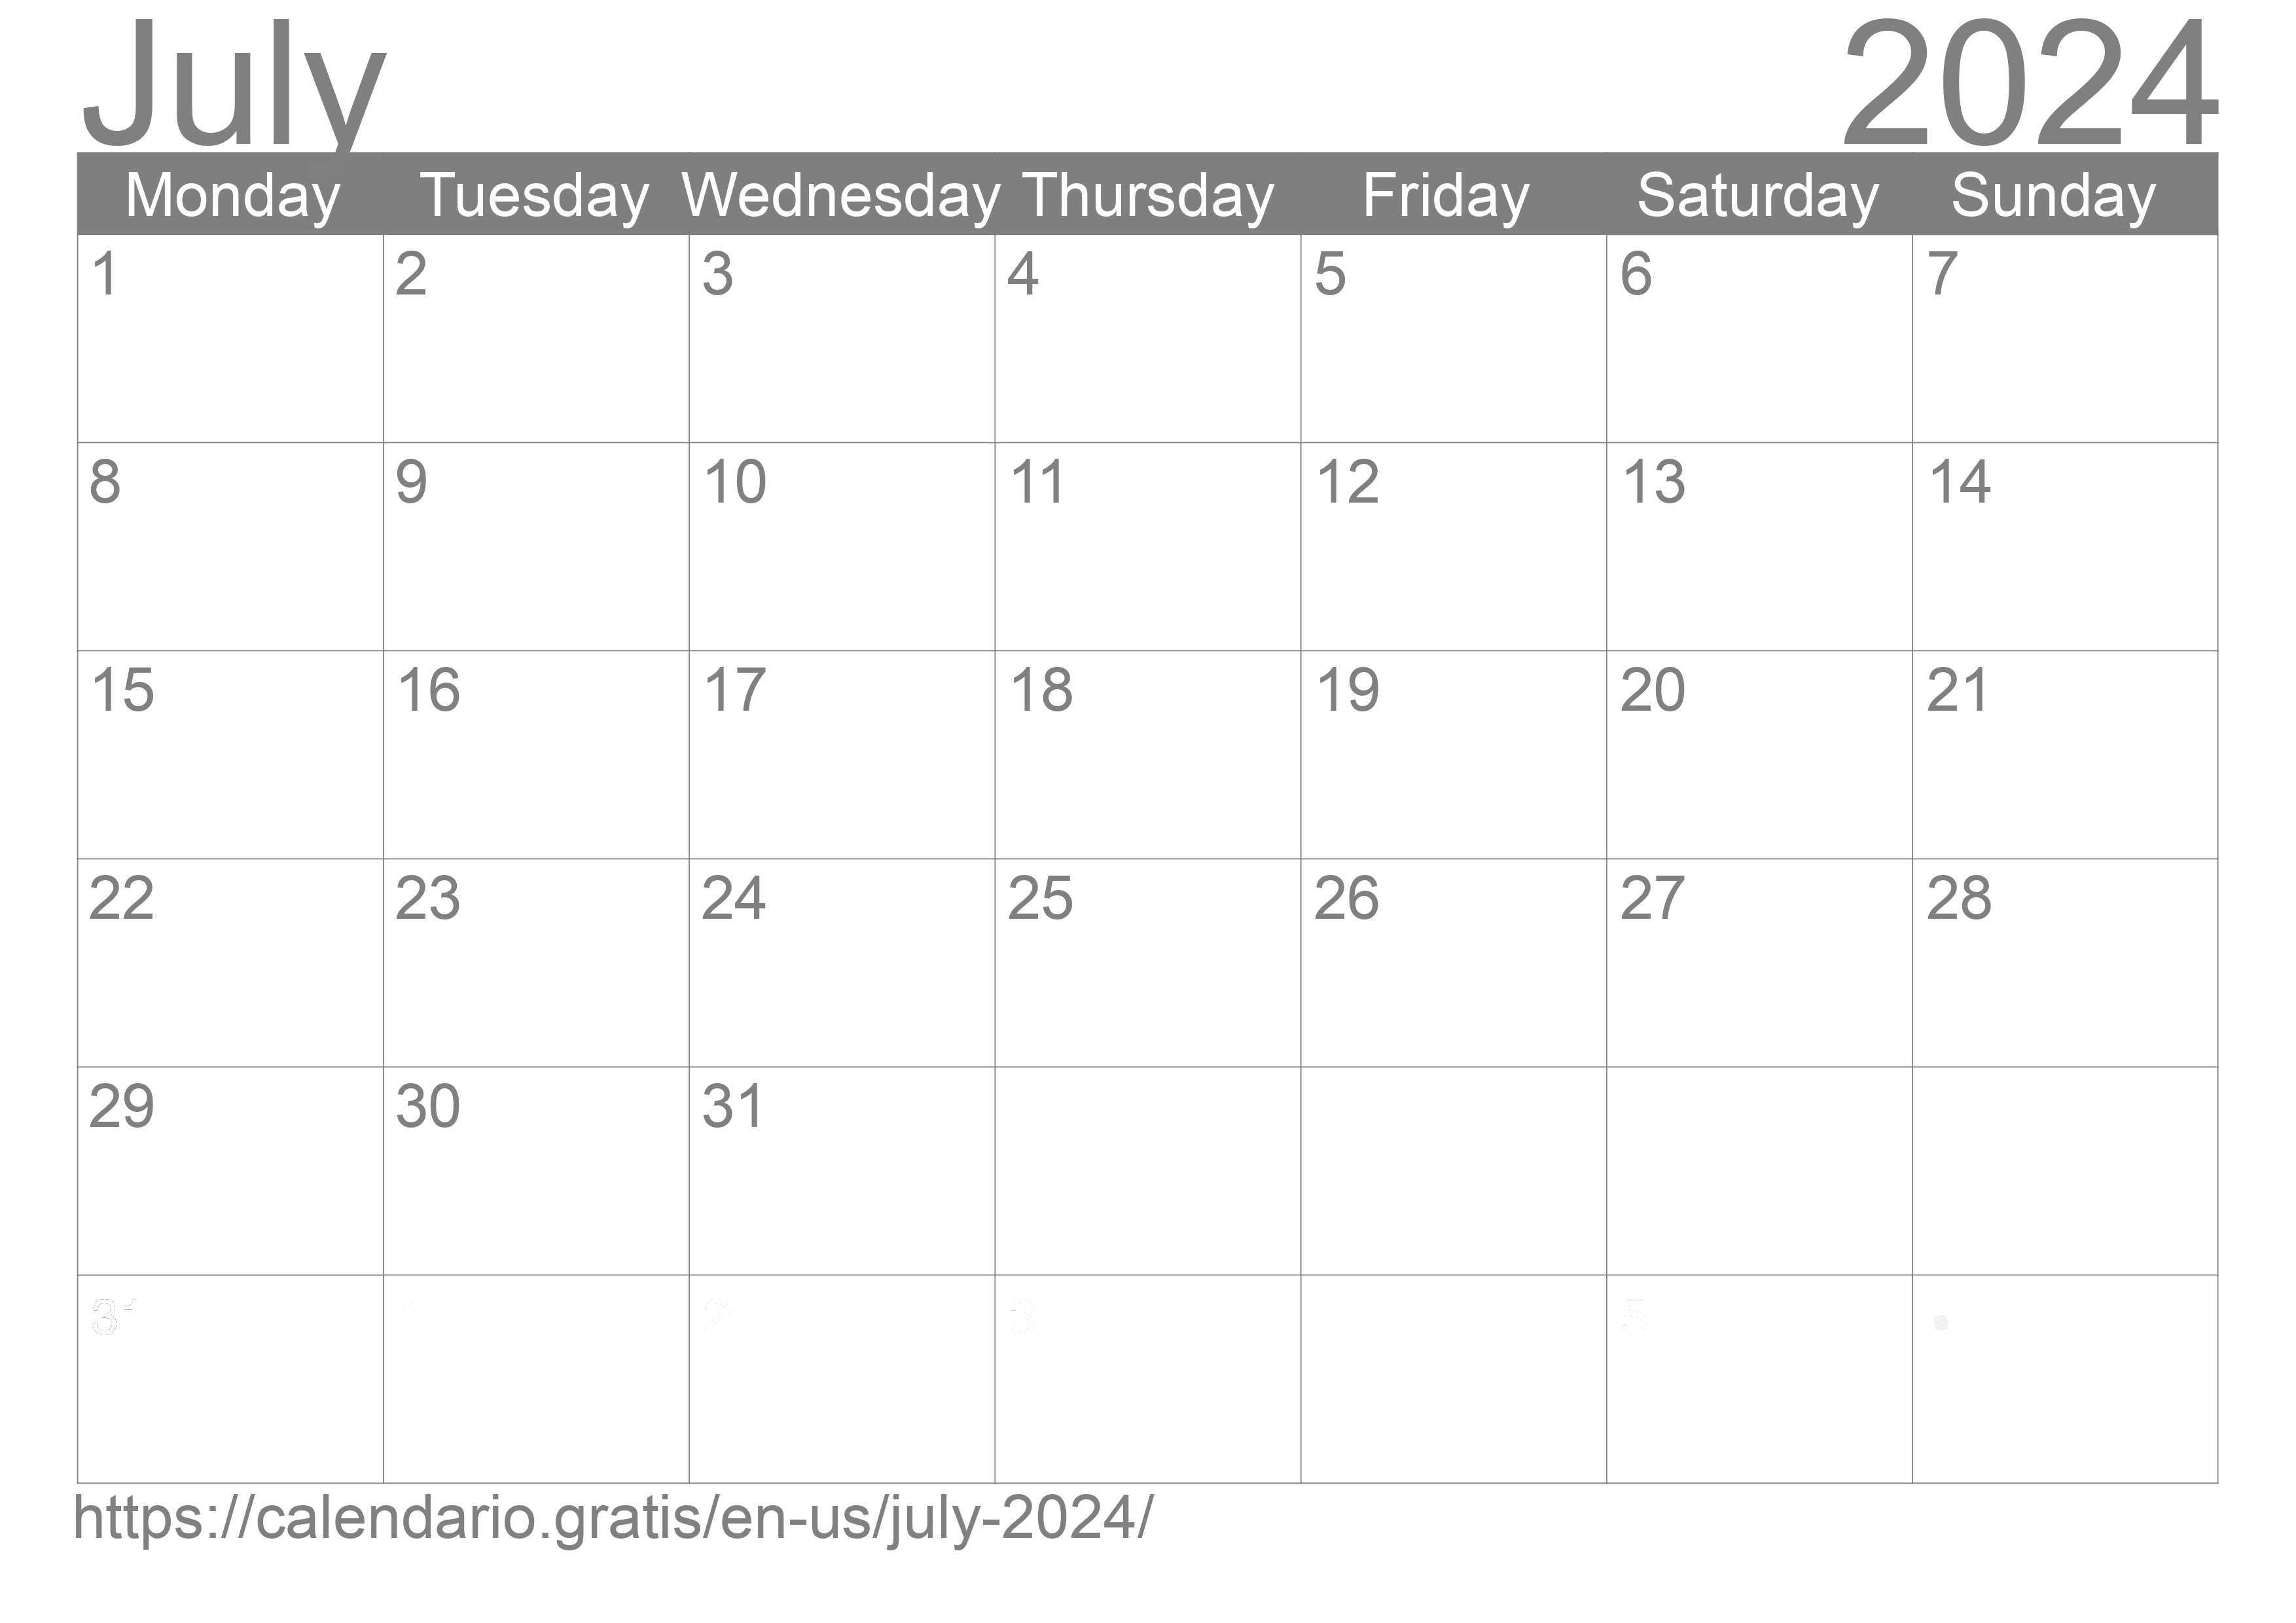 Calendar July 2024 from United States of America in English ☑️